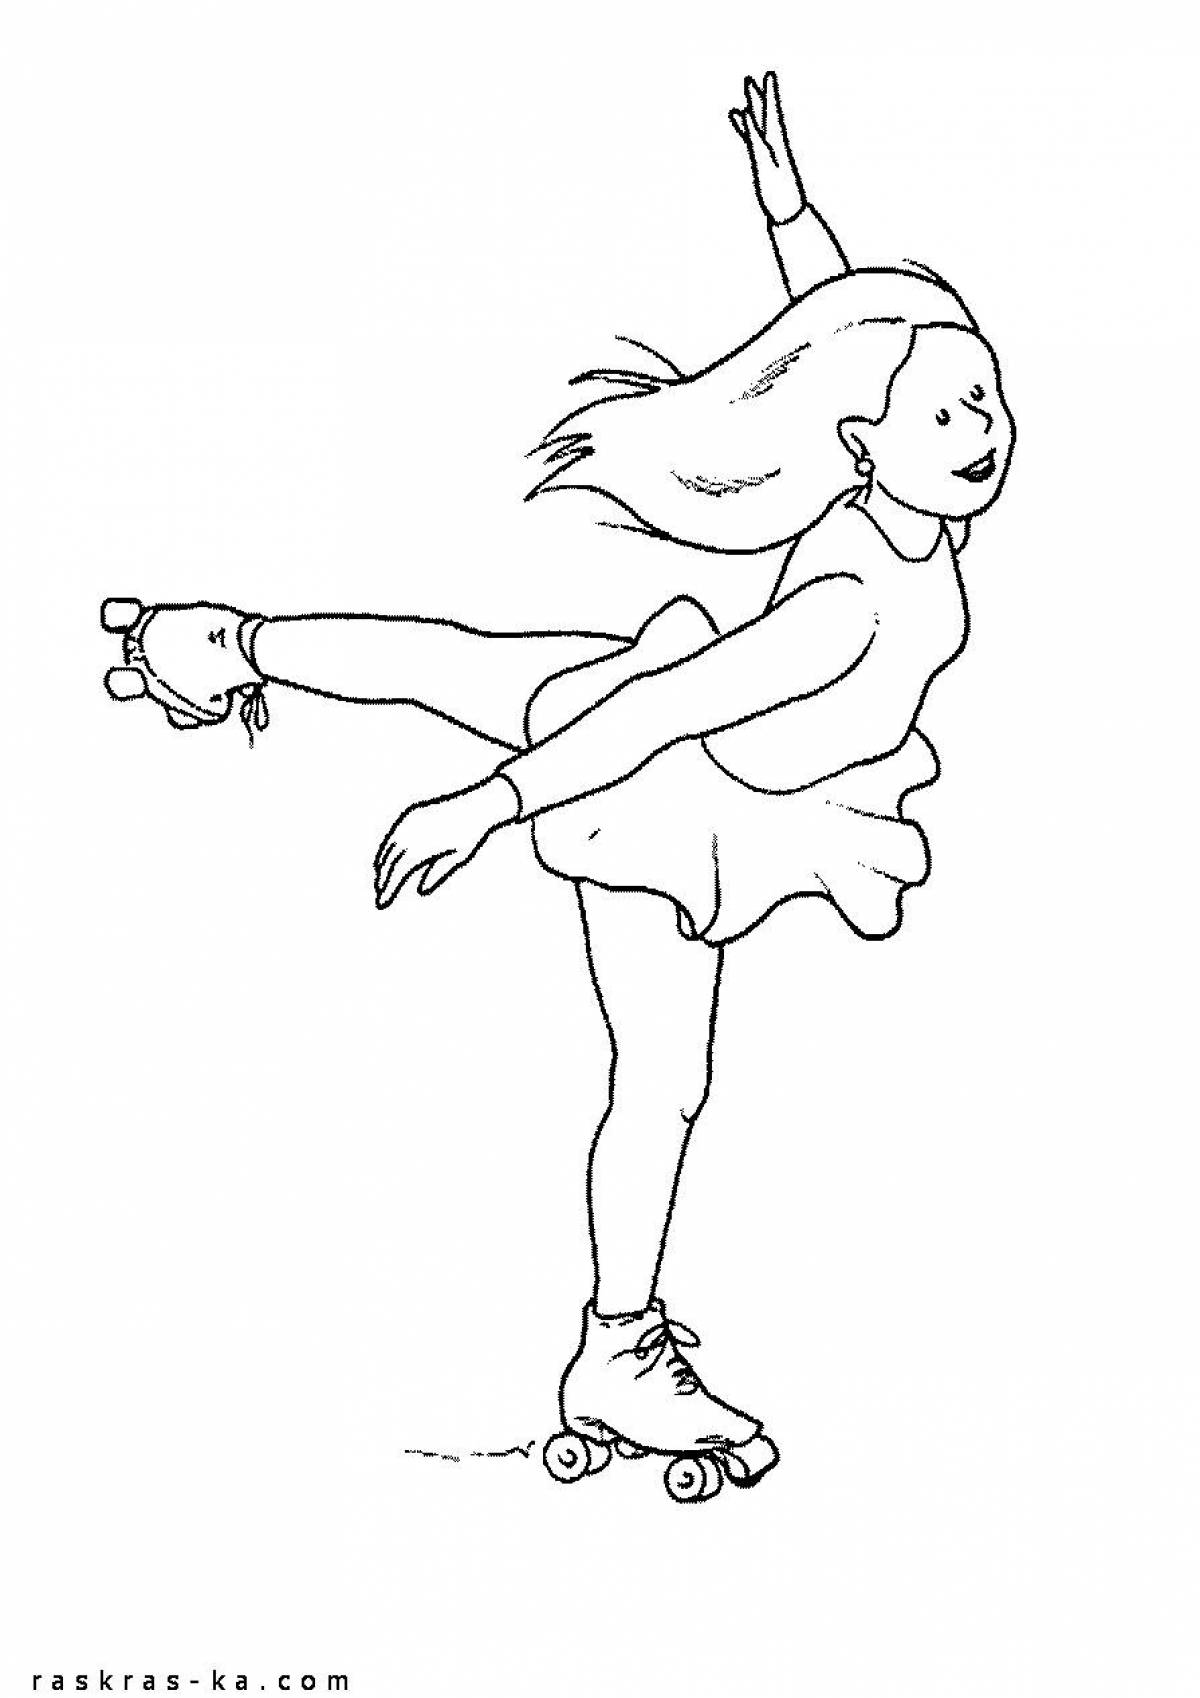 Fabulous figure skating coloring page